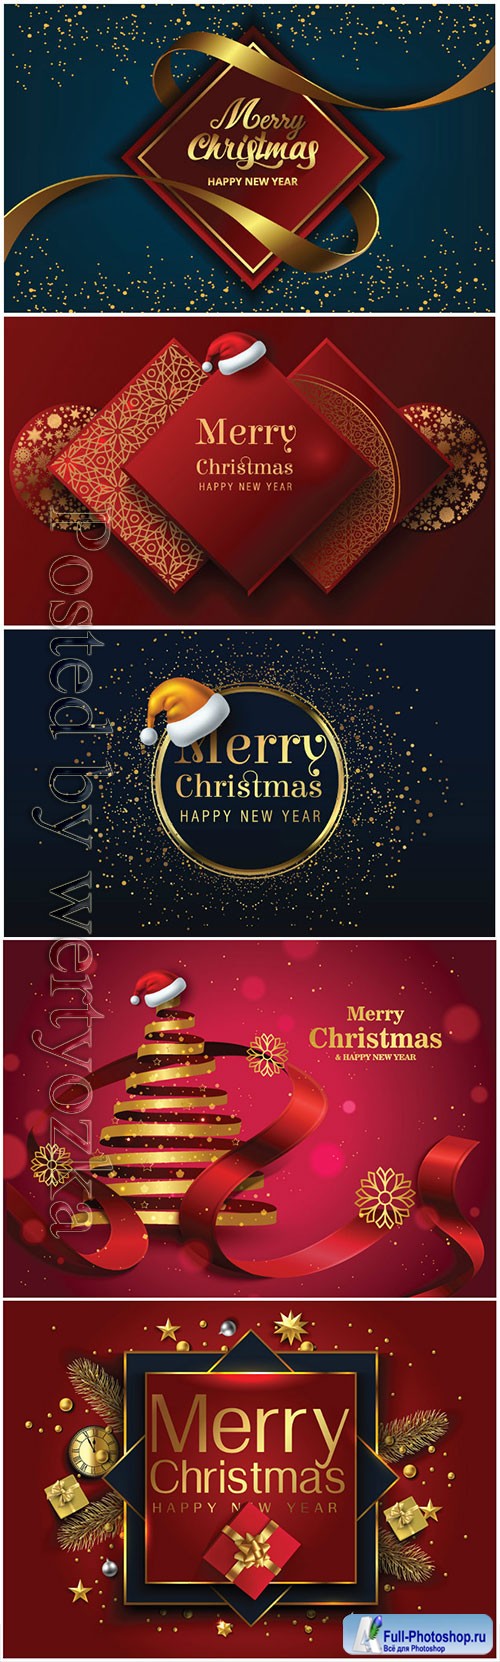 2020 Merry Chistmas and Happy New Year vector illustration # 5